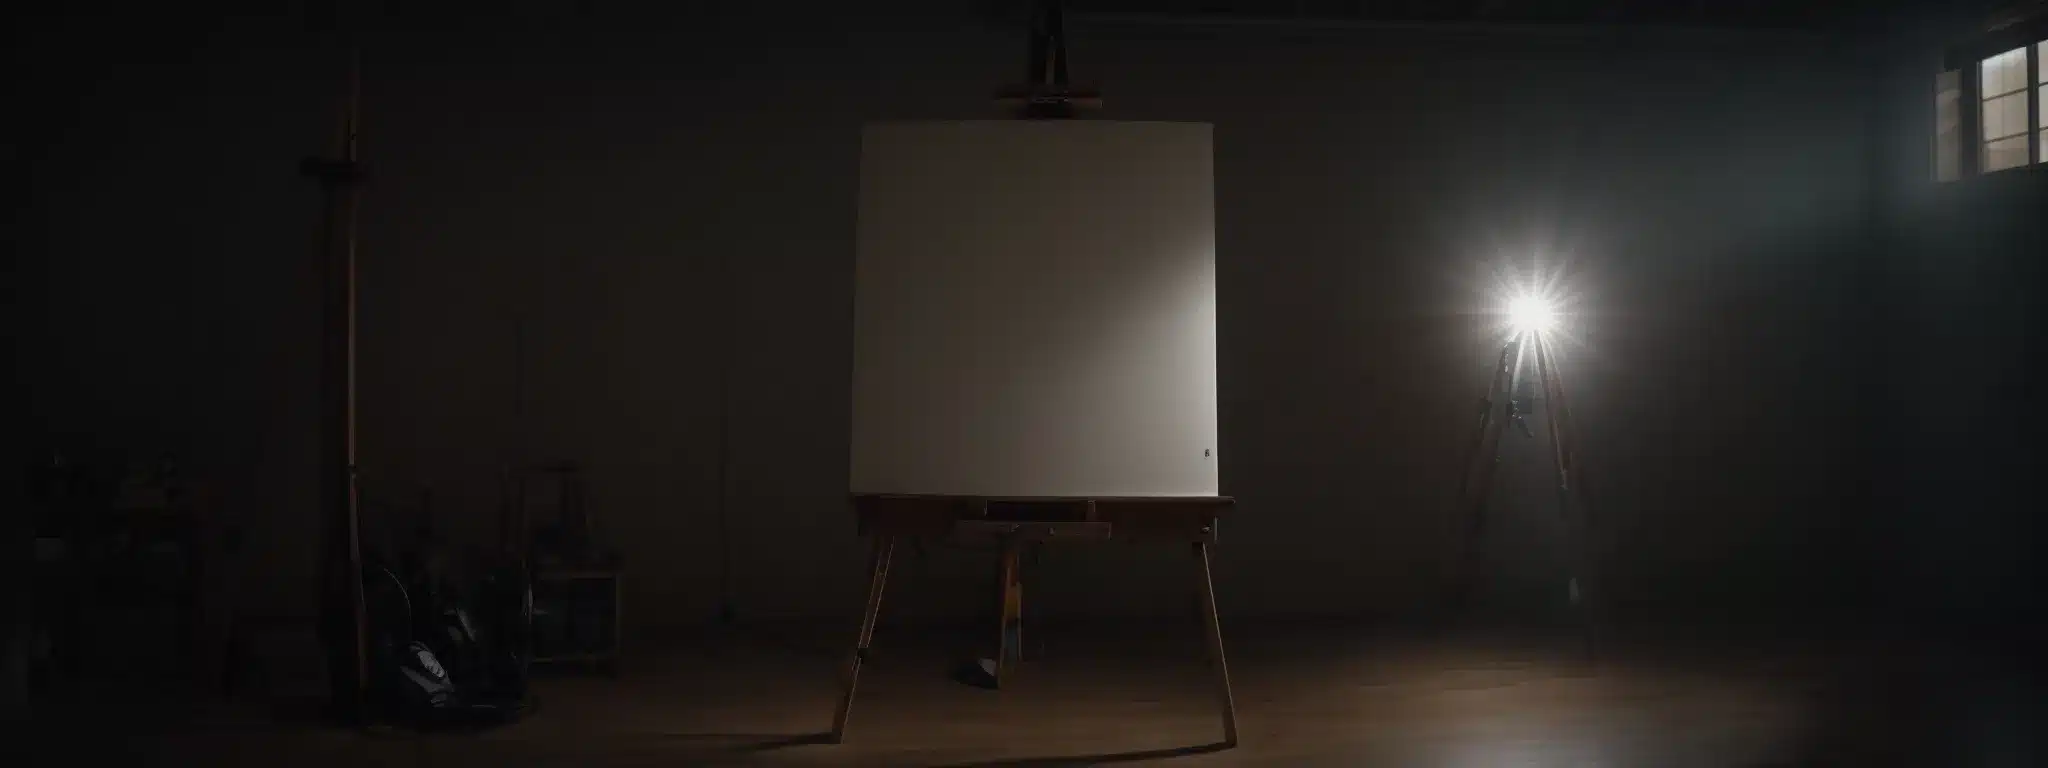 A Spotlight Illuminates An Empty Canvas On An Easel, Ready For The First Stroke Of A New, Innovative Masterpiece.